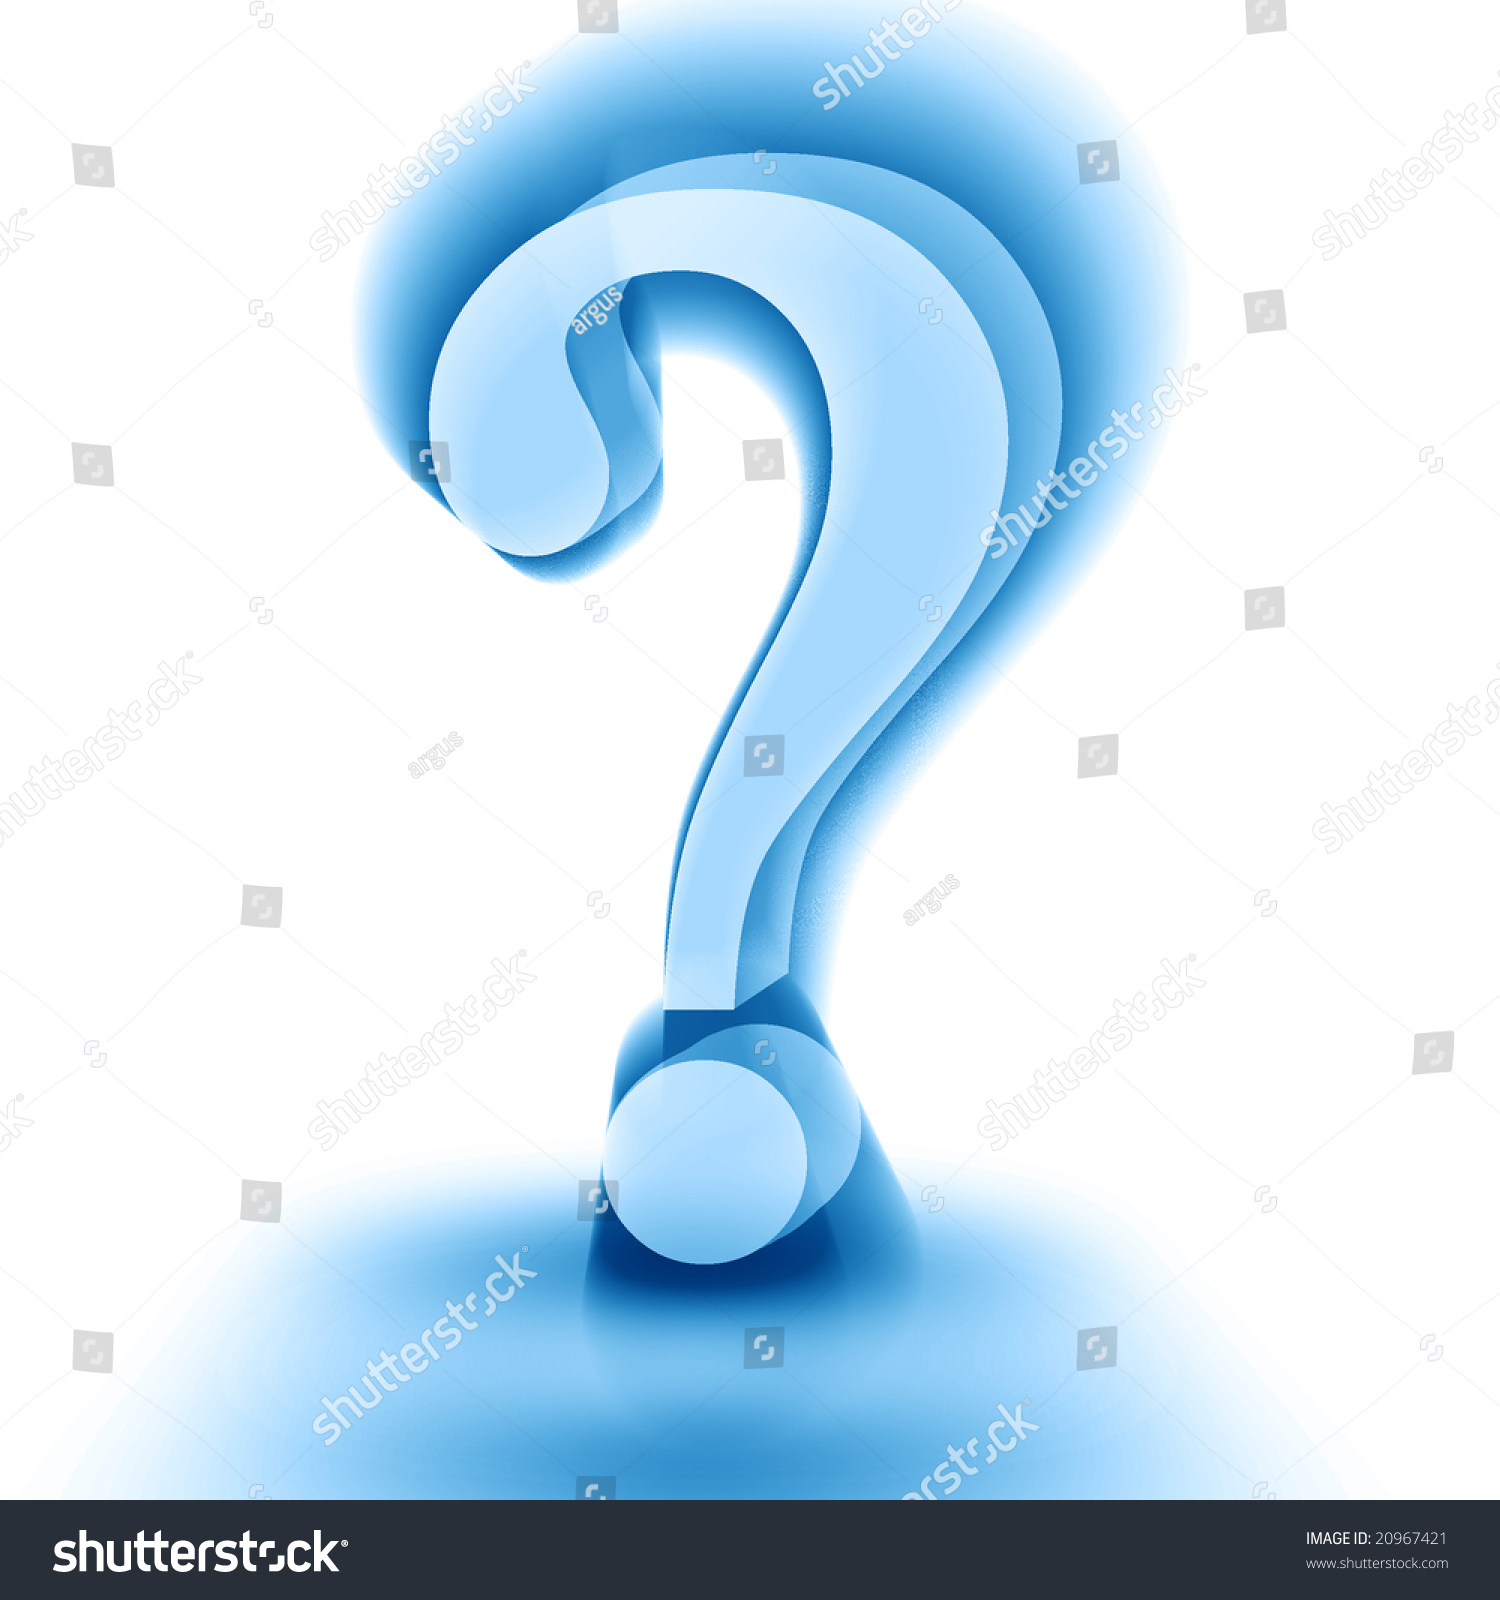 3d Question Mark On A Solid White Background Stock Photo 20967421 ...